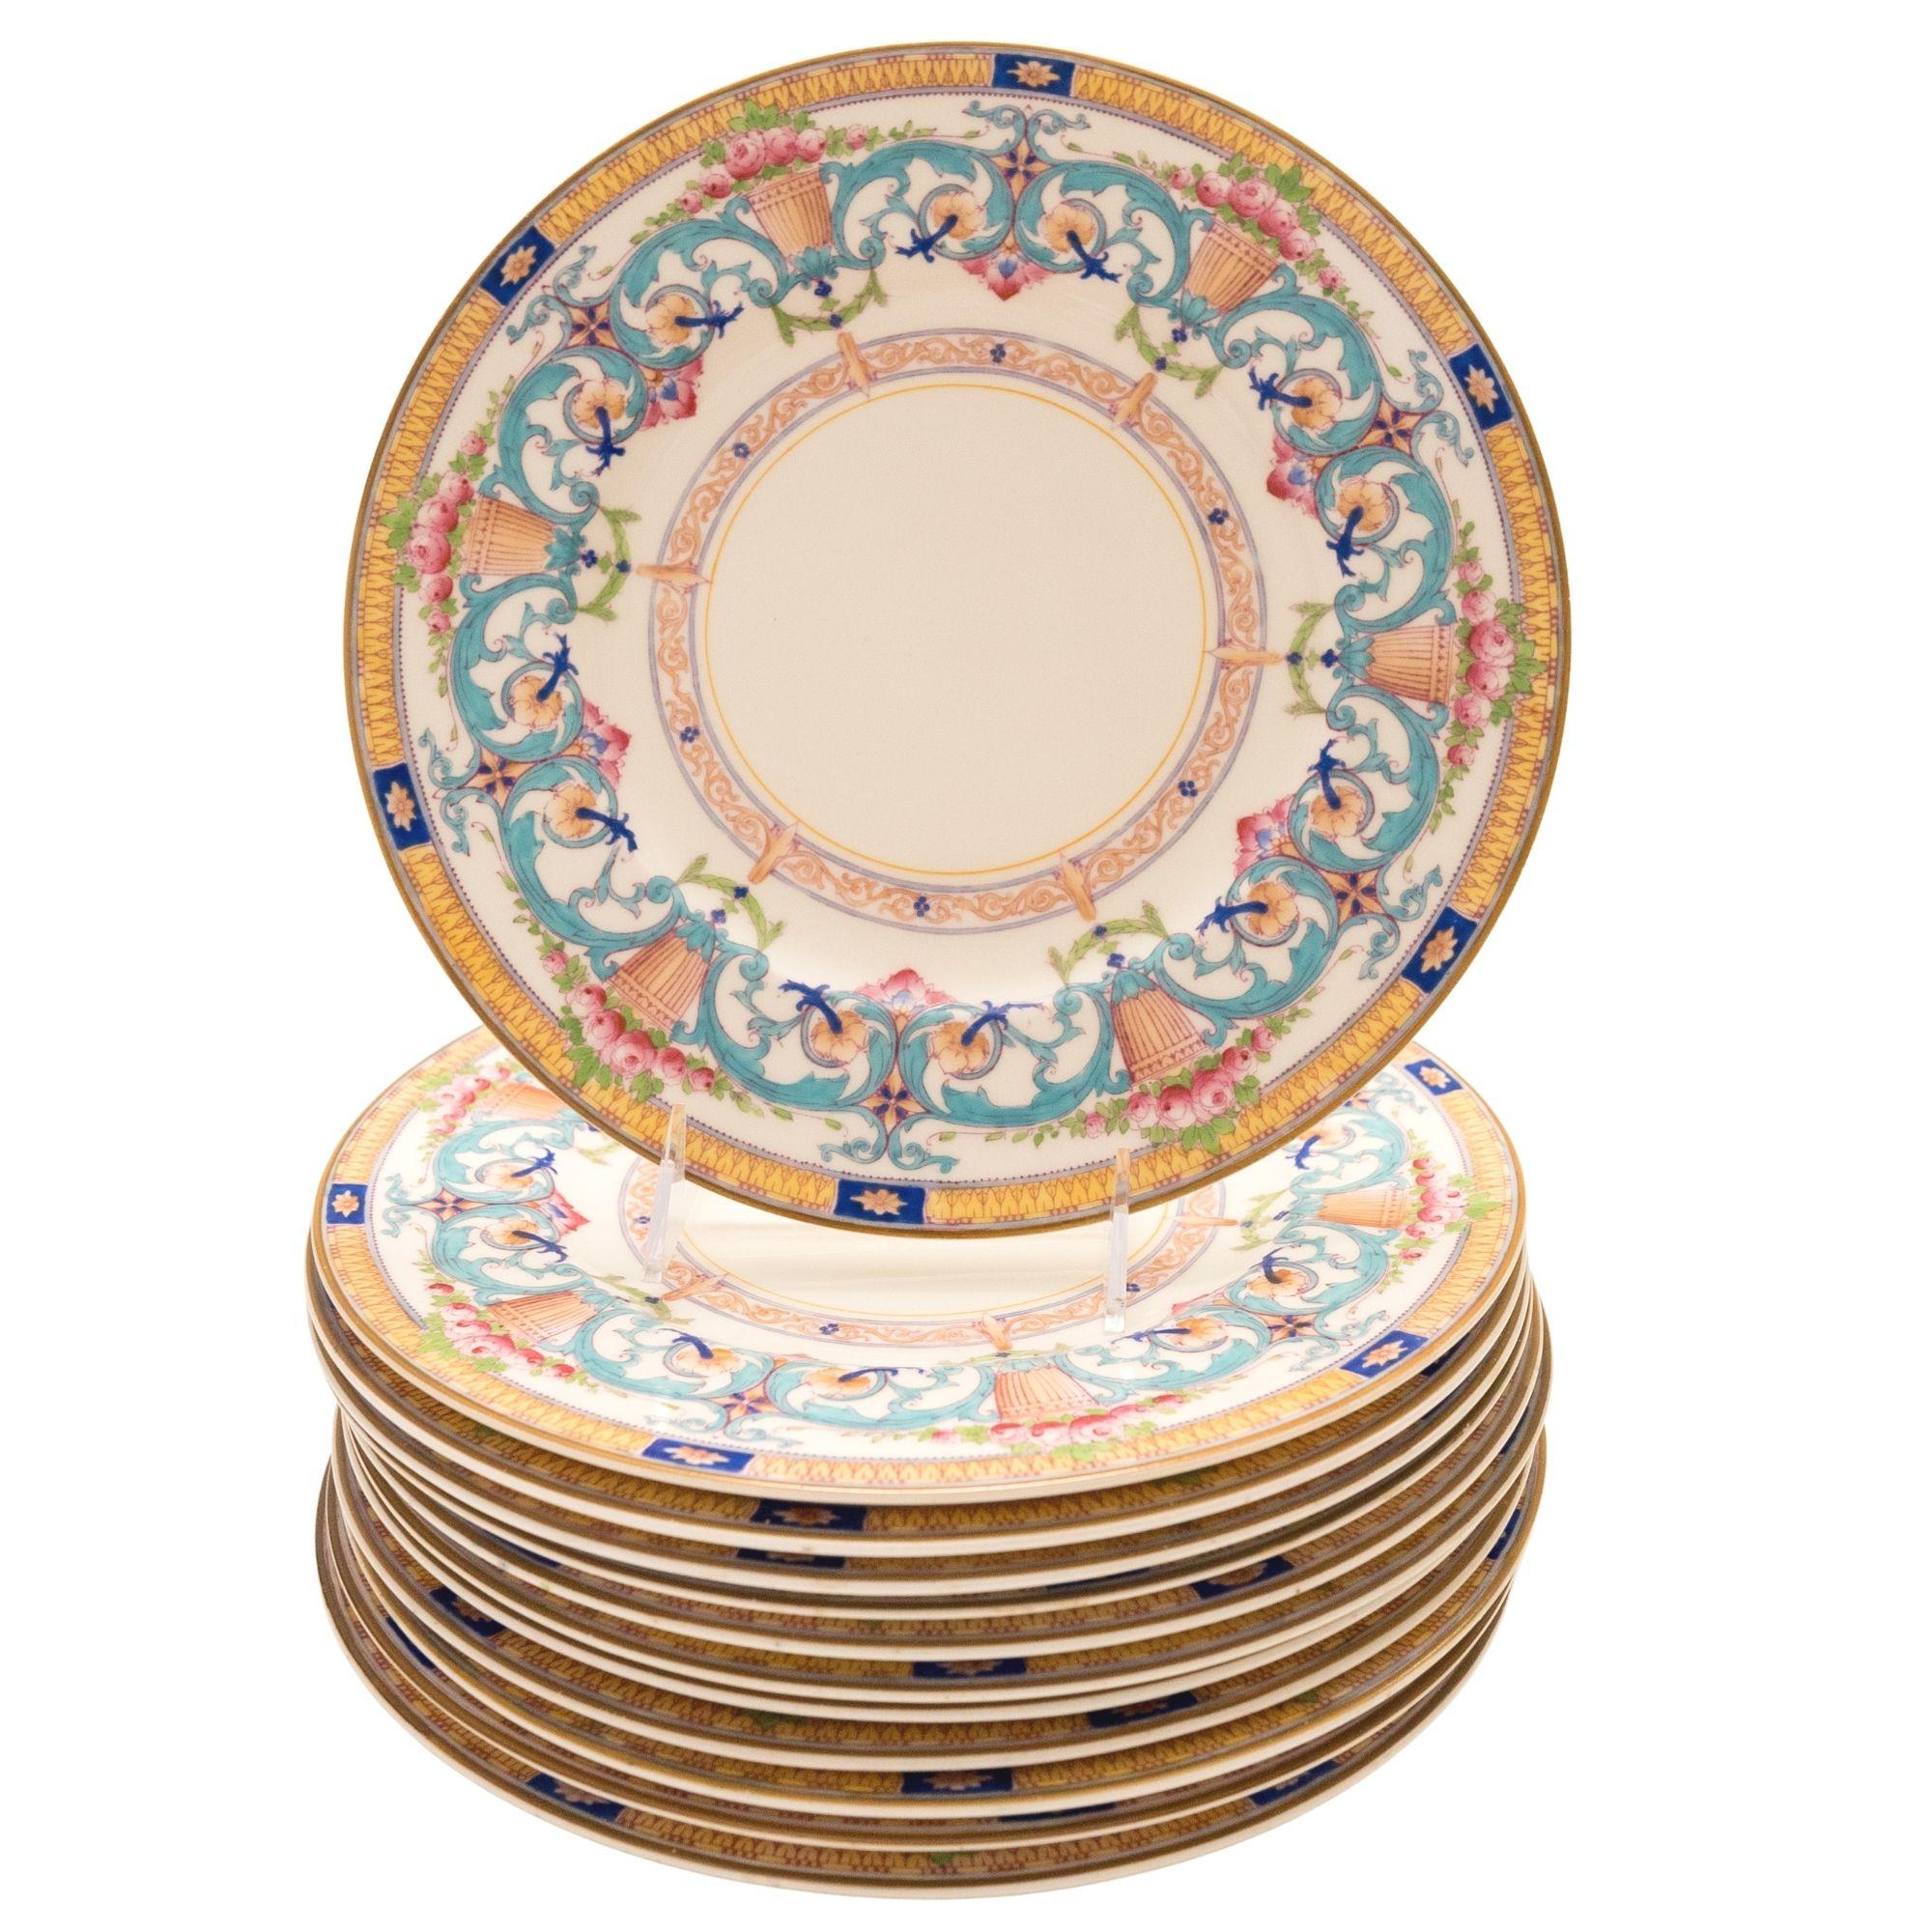 A colorful and elaborately hand enameled set of 12 dinner plates by one of England's most re known firm: Royal Worcester. This set features turquoise, pink, cobalt, greens and yellows in a pretty floral basket swag design. In really nice antique